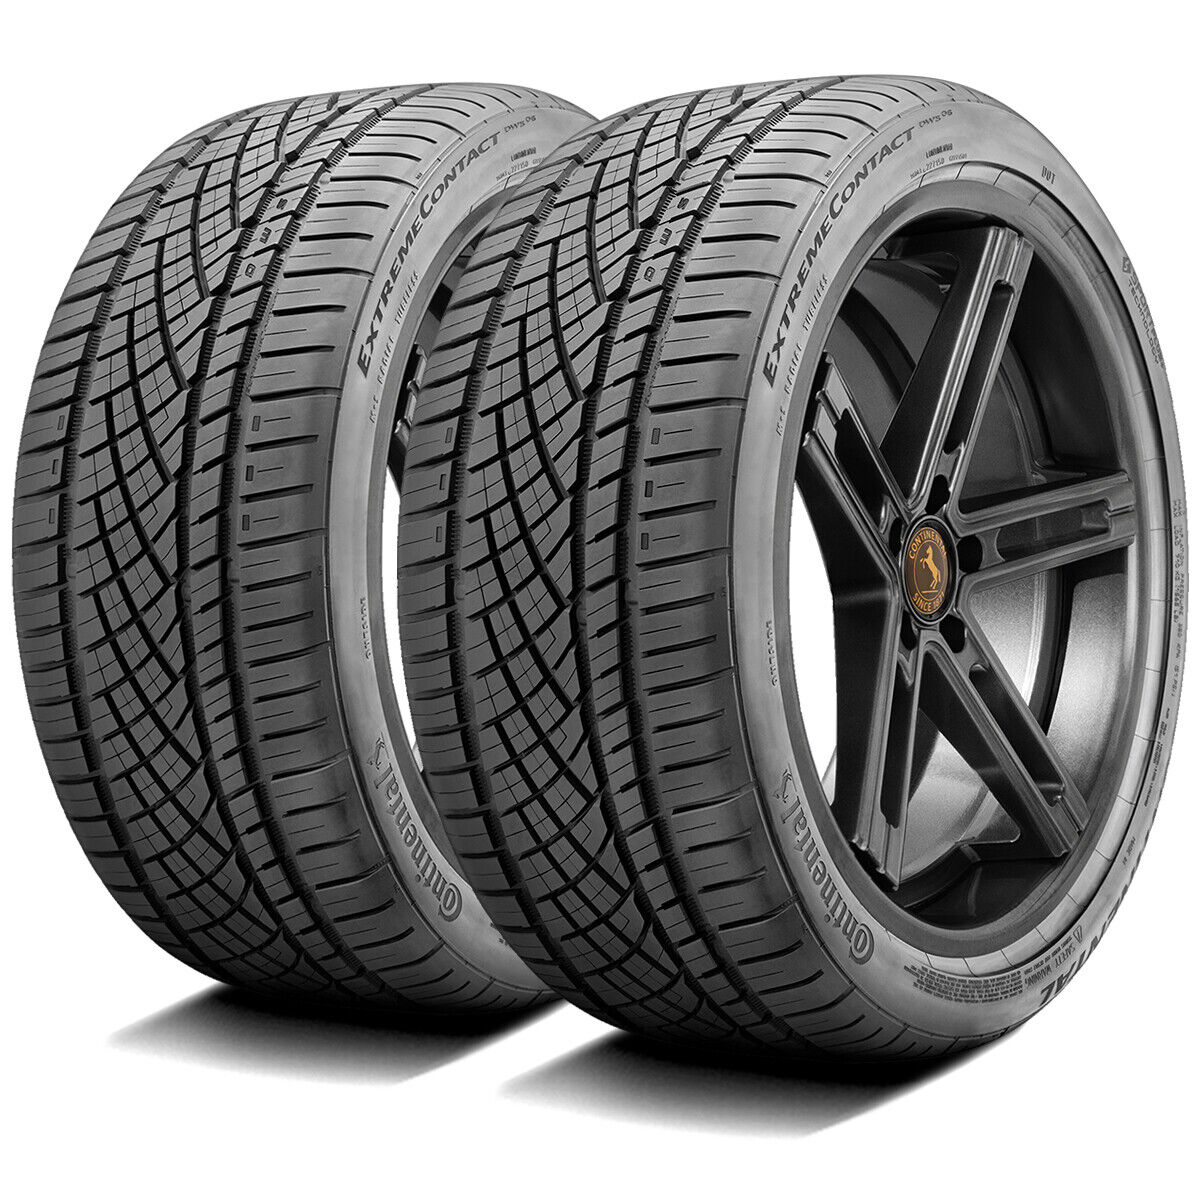 2 Tires Continental ExtremeContact DWS 06 215/50R17 95W XL A/S High Performance